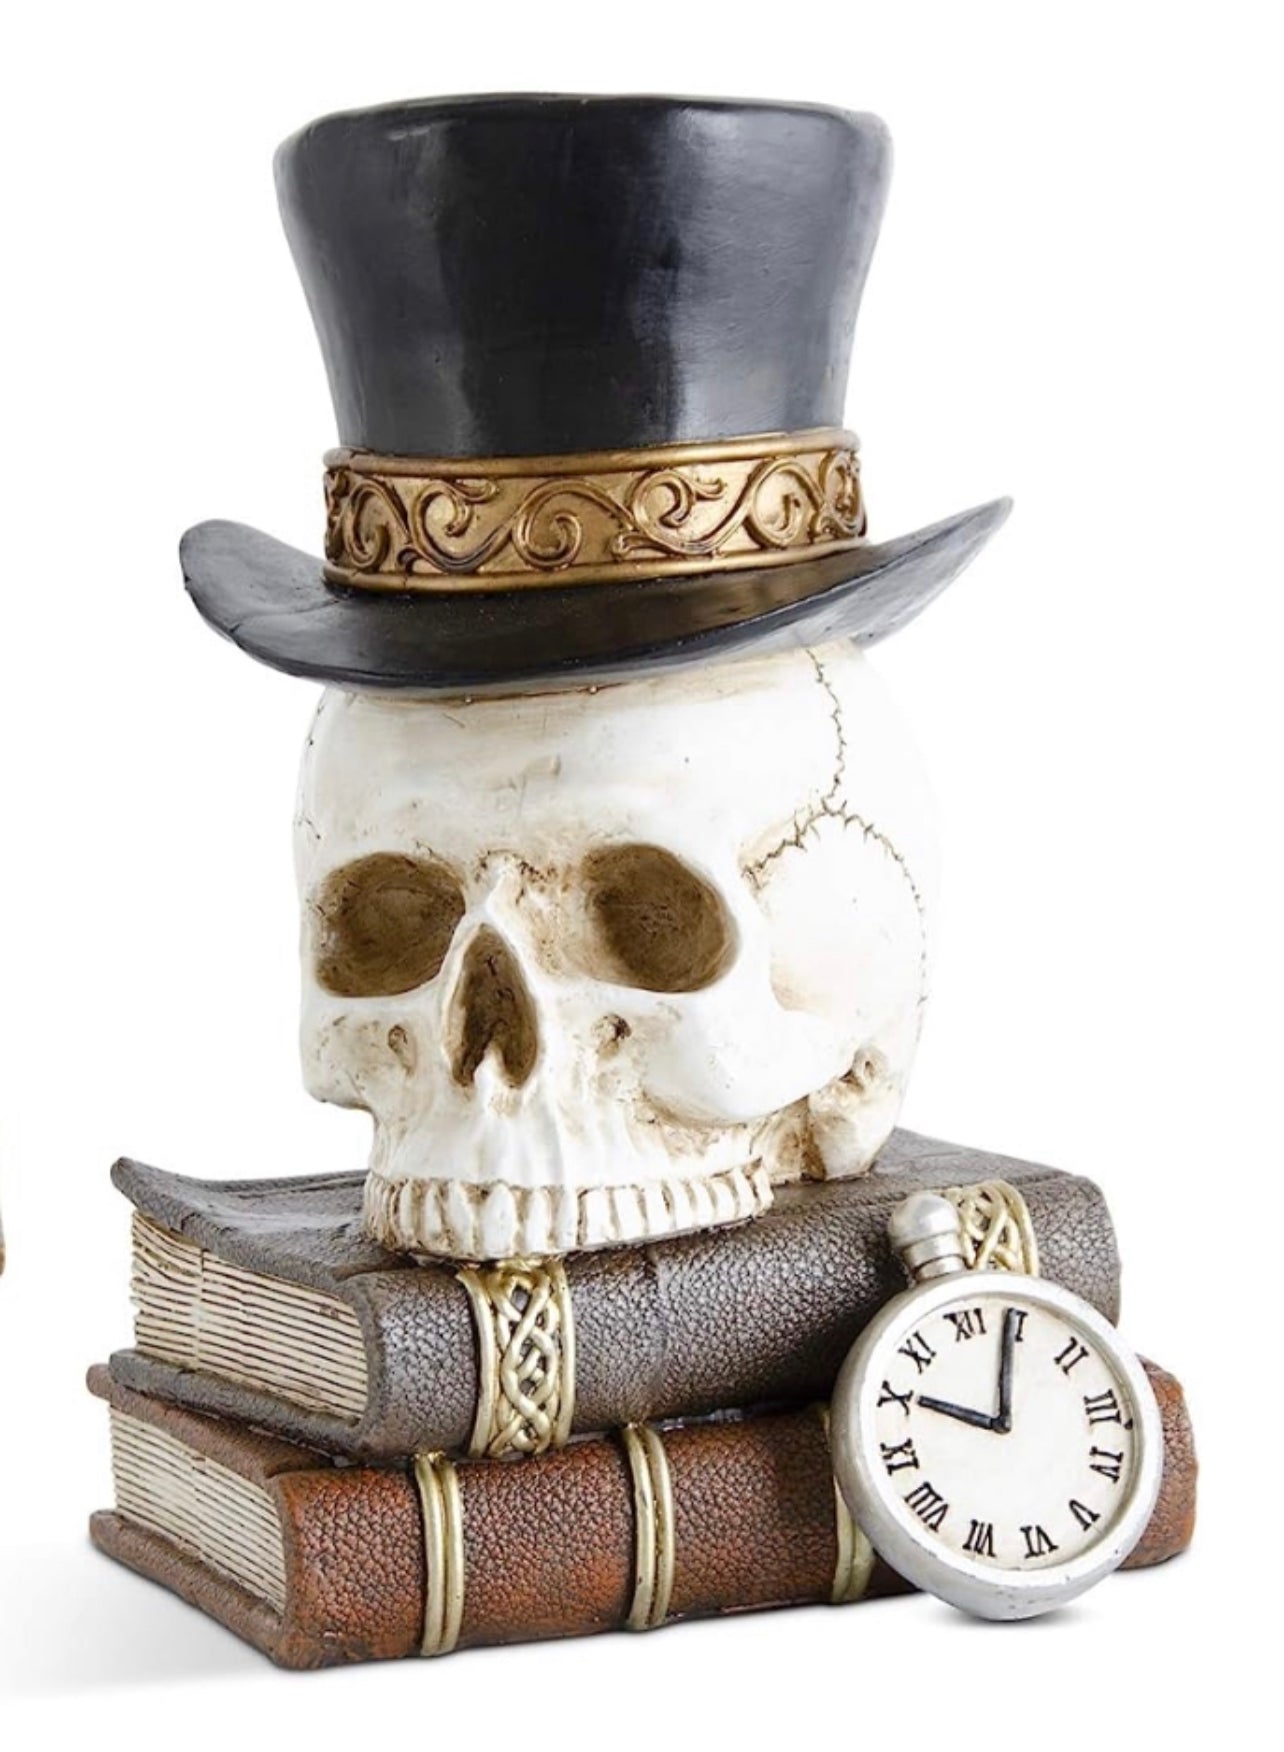 Skull with Top Hat on Stack of Books